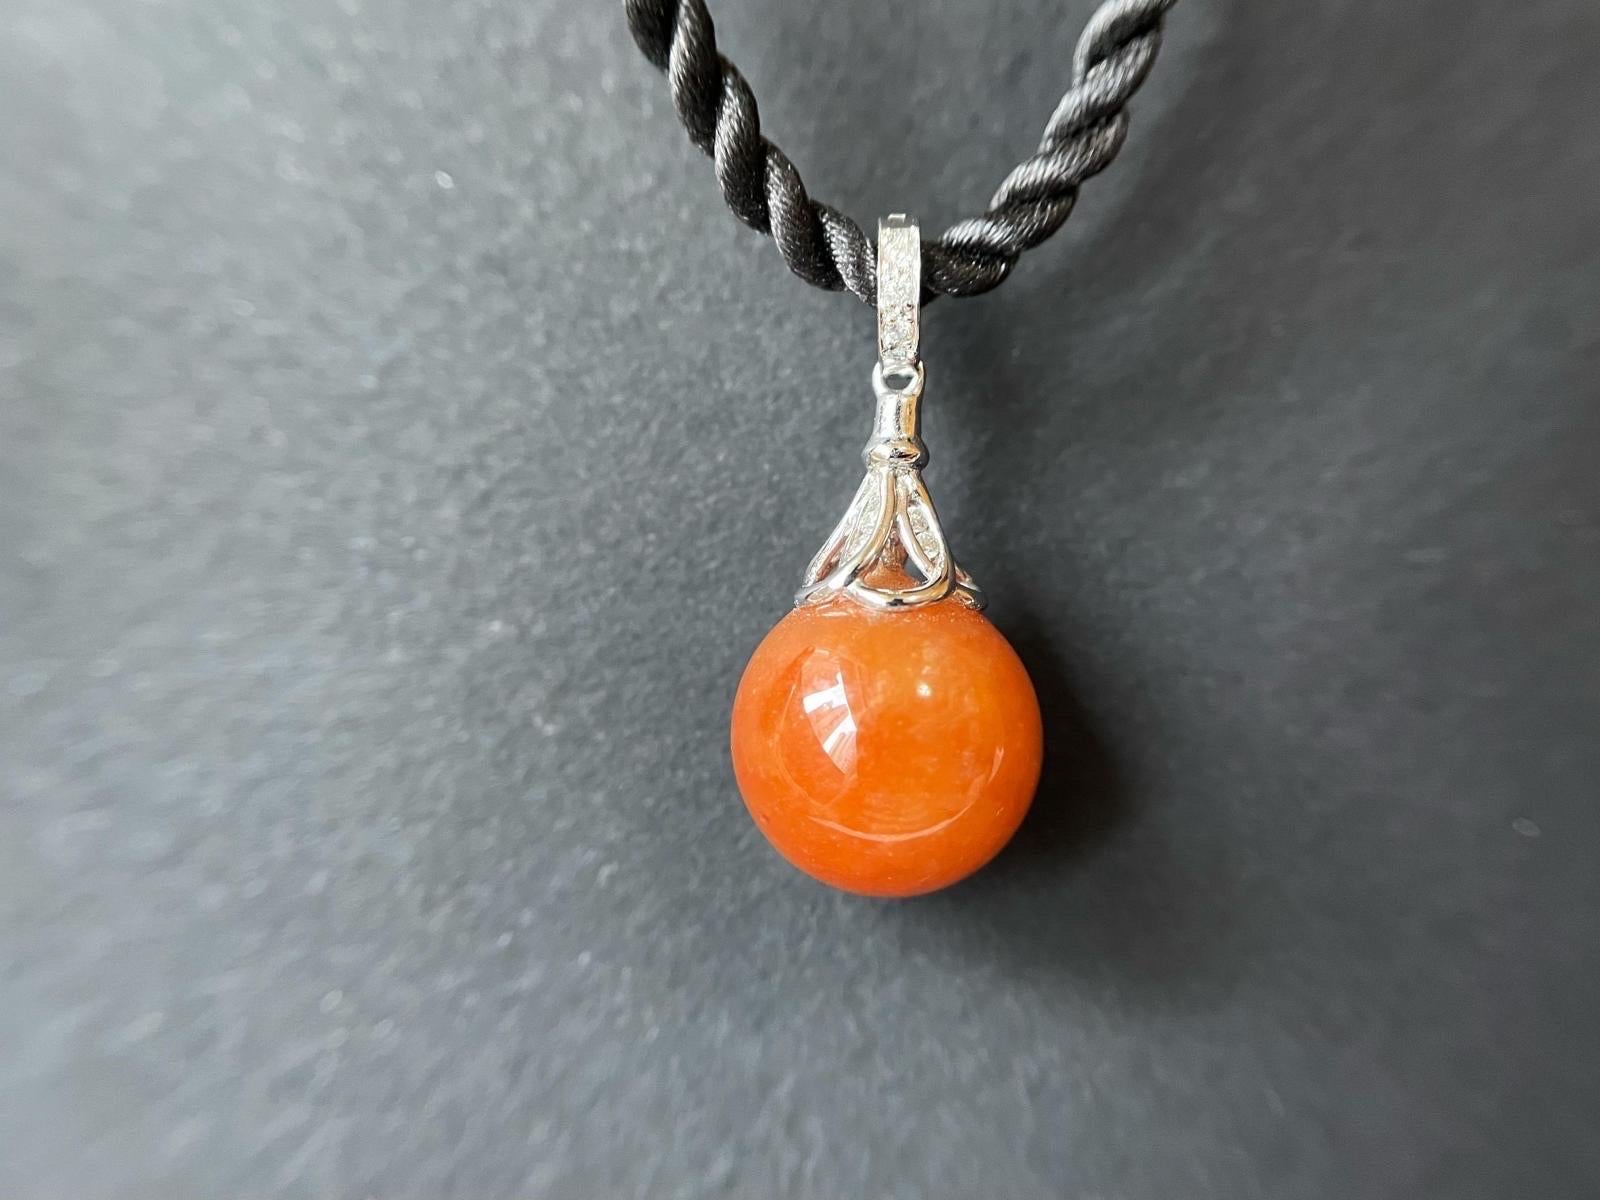 Indulge in the beauty and power of jadeite jade with this exquisite red jadeite jade pendant. Made from Type A Natural Jadeite, this pendant boasts a stunning red/brick red color that is simply breathtaking. The smooth texture of the ball adds